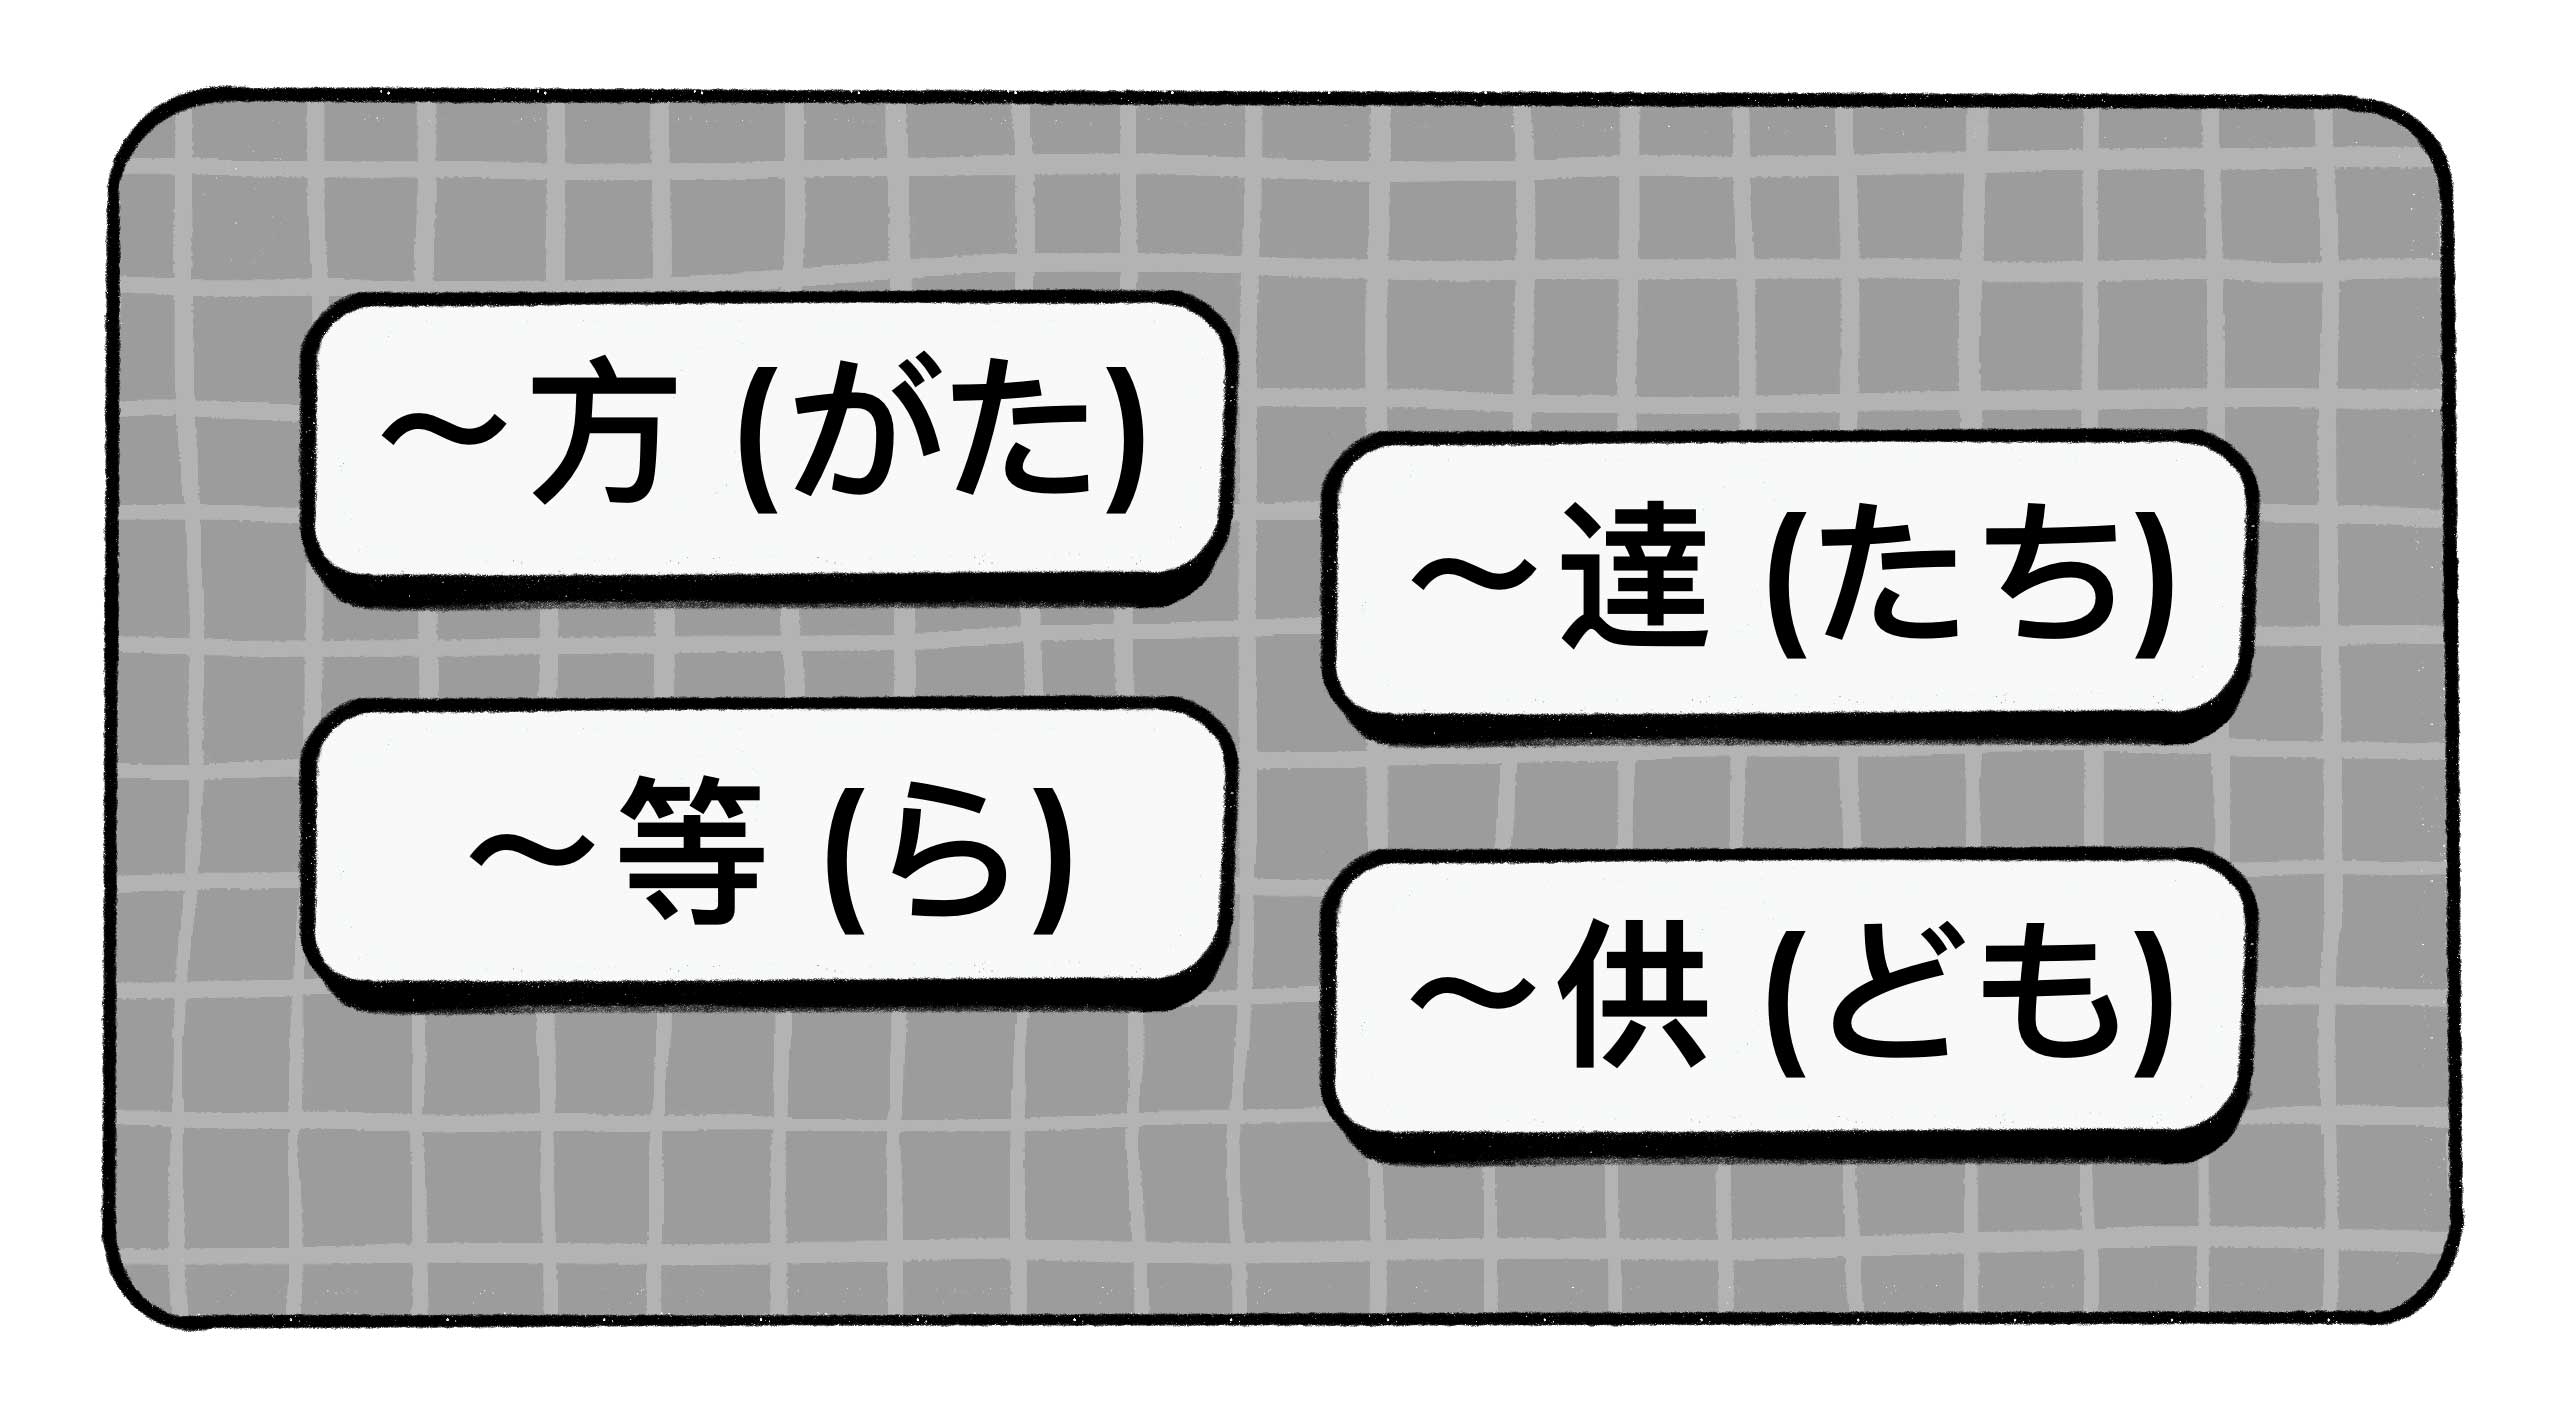 Japanese Plural Suffixes